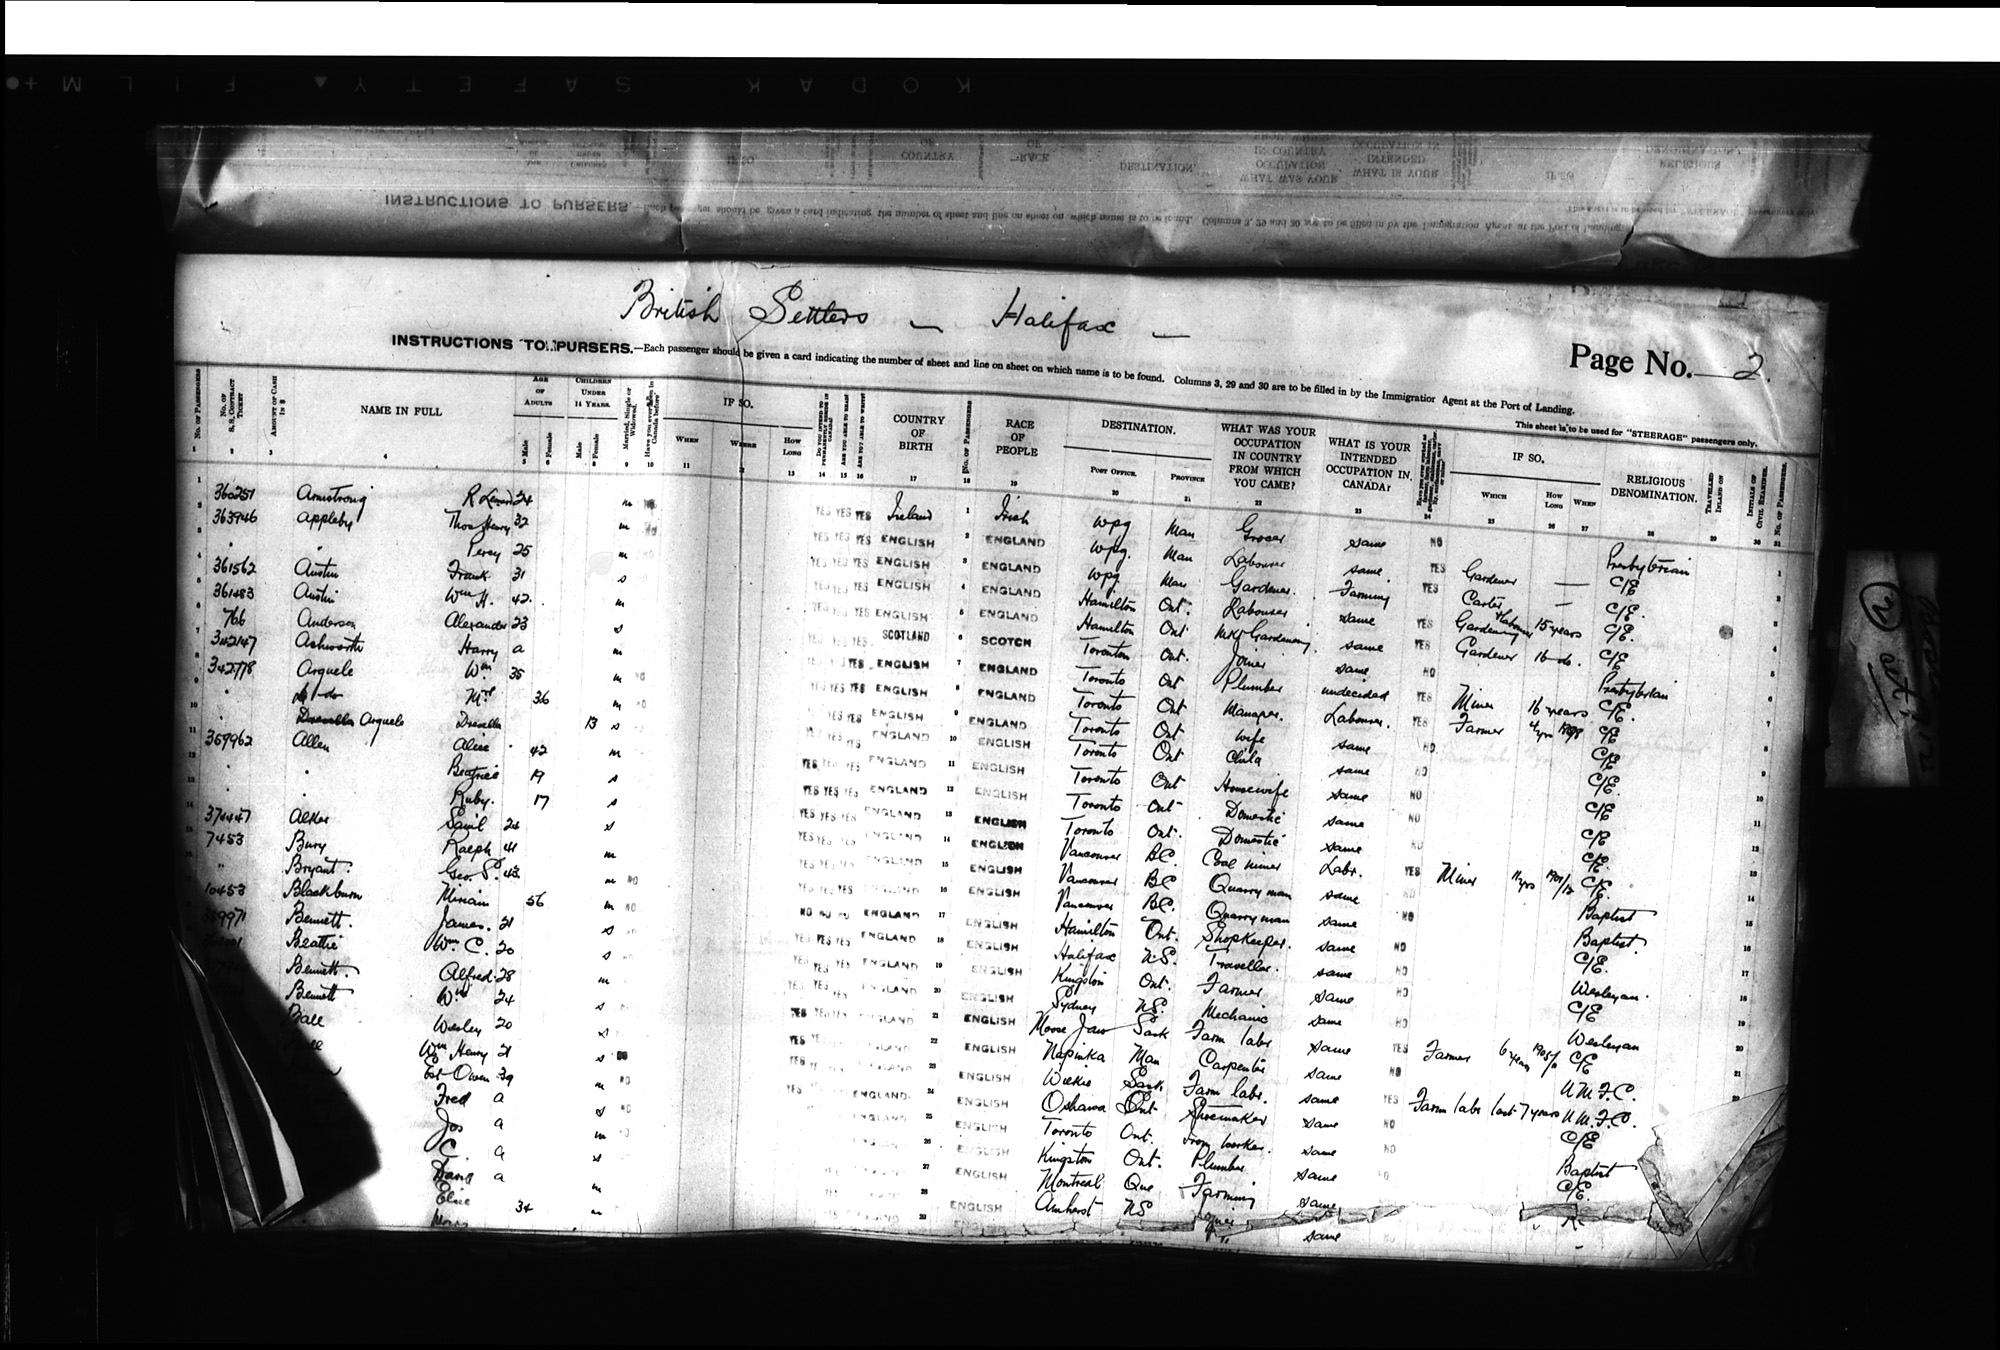 Digitized page of Passenger Lists for Image No.: CANIMM1913PLIST_0000406960-00156